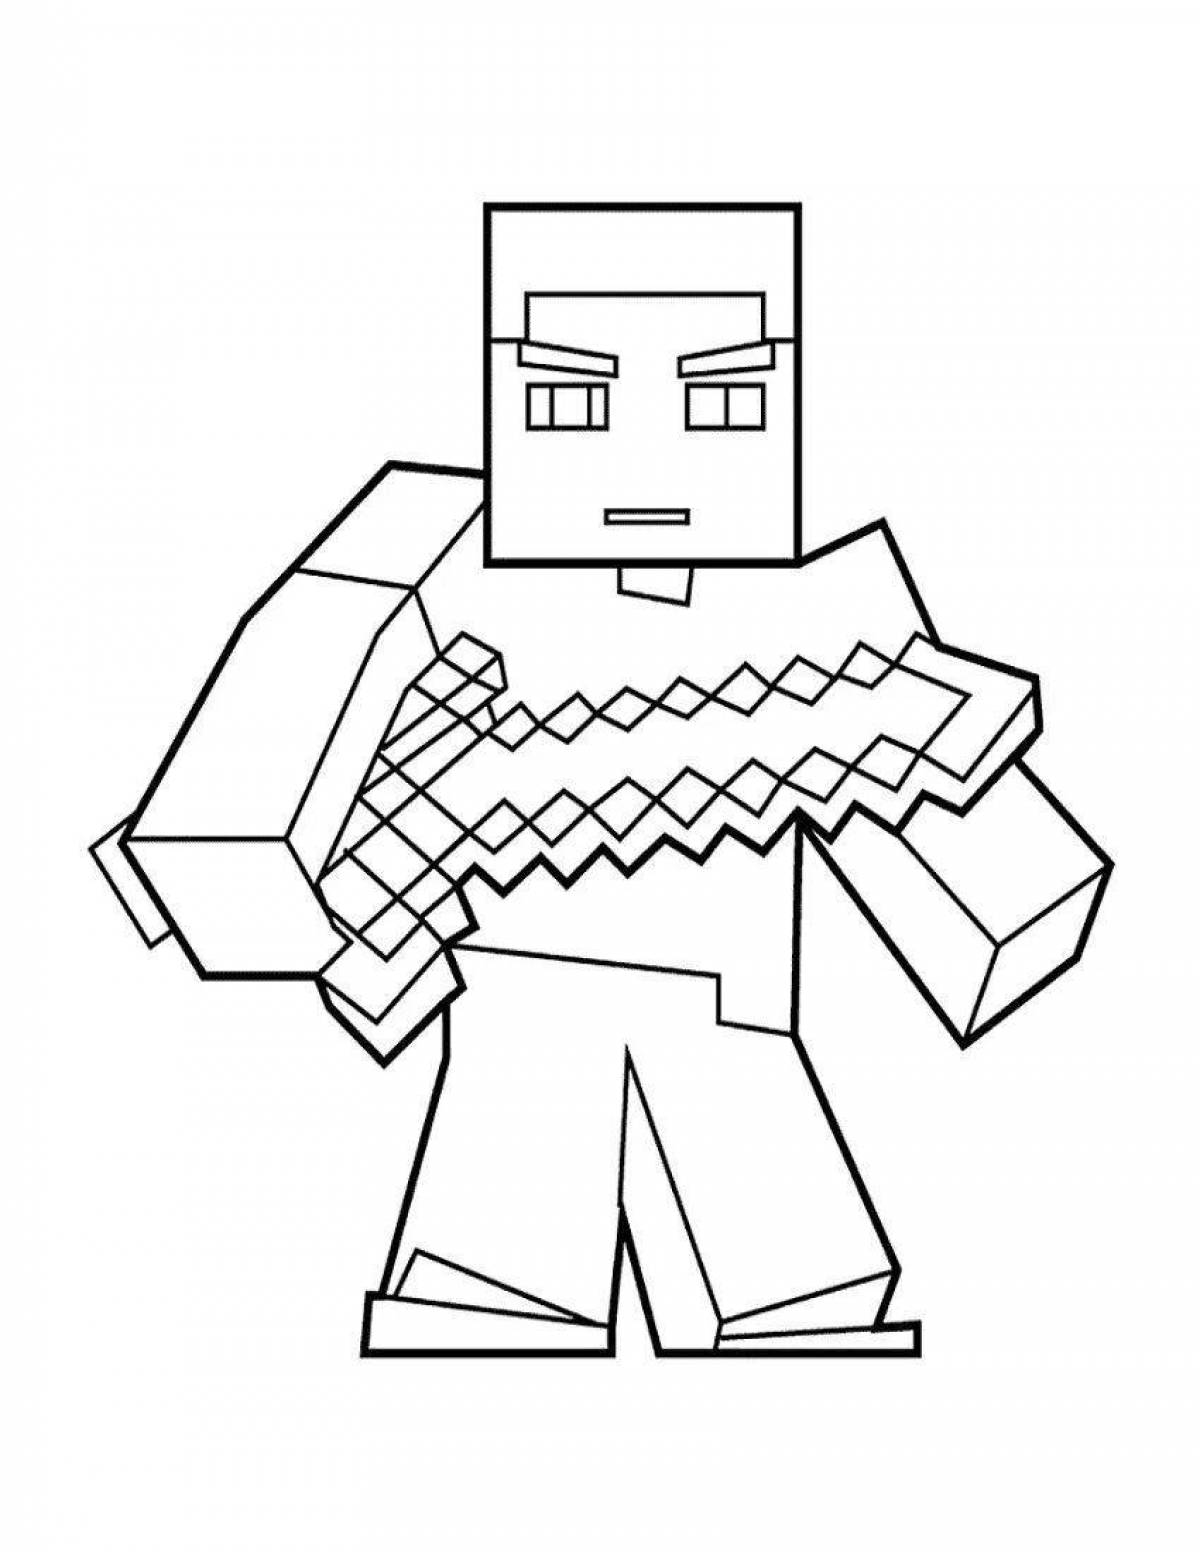 Playful minecraft dots coloring page